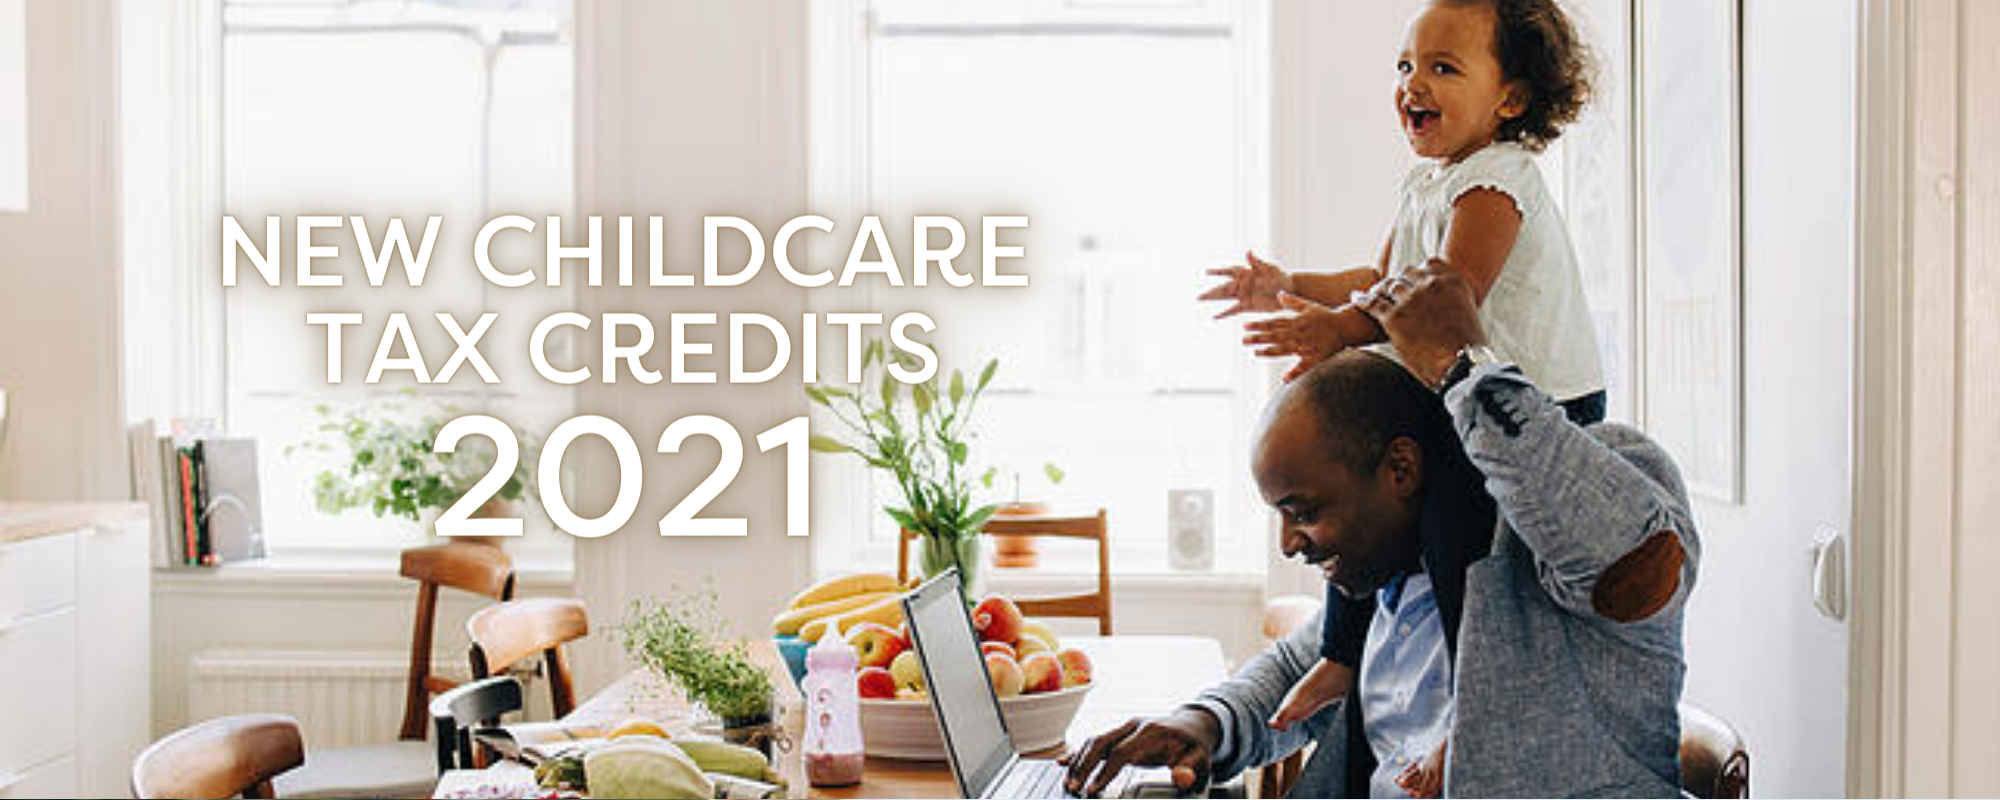 2021 Tax Credits for Childcare